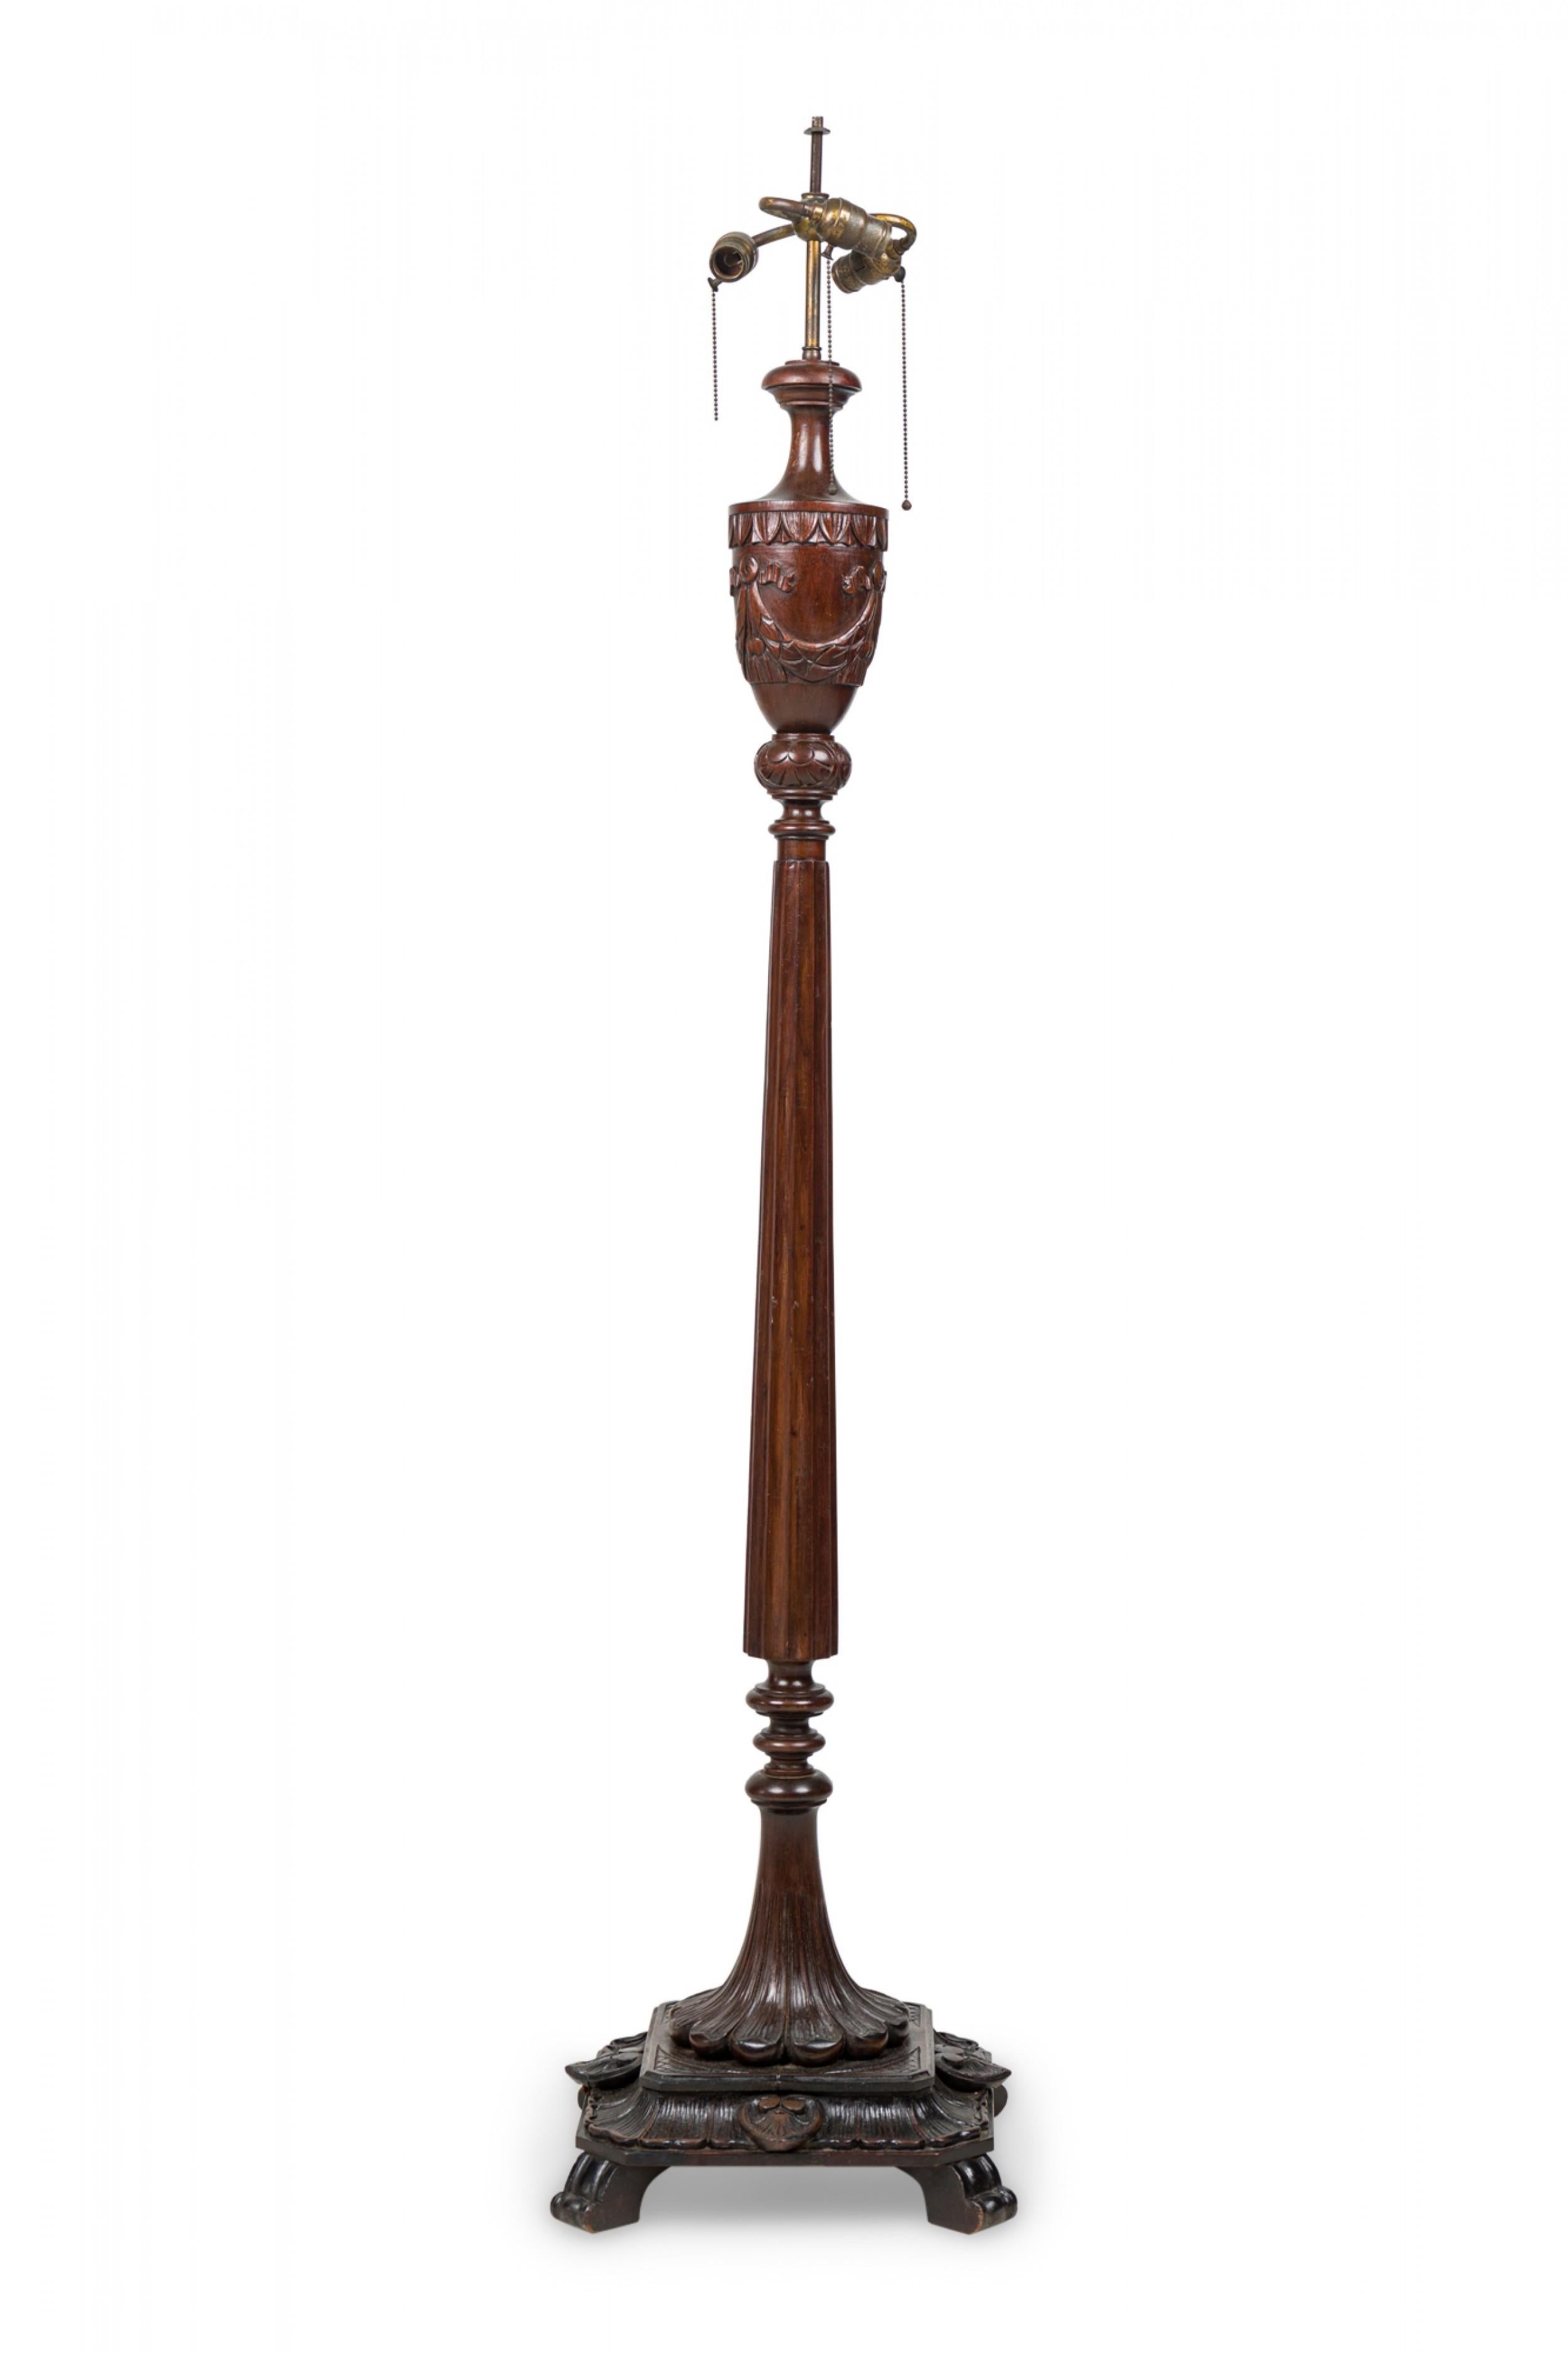 20th Century English Victorian Elaborately Carved Mahogany and Brass Floor Lamp For Sale